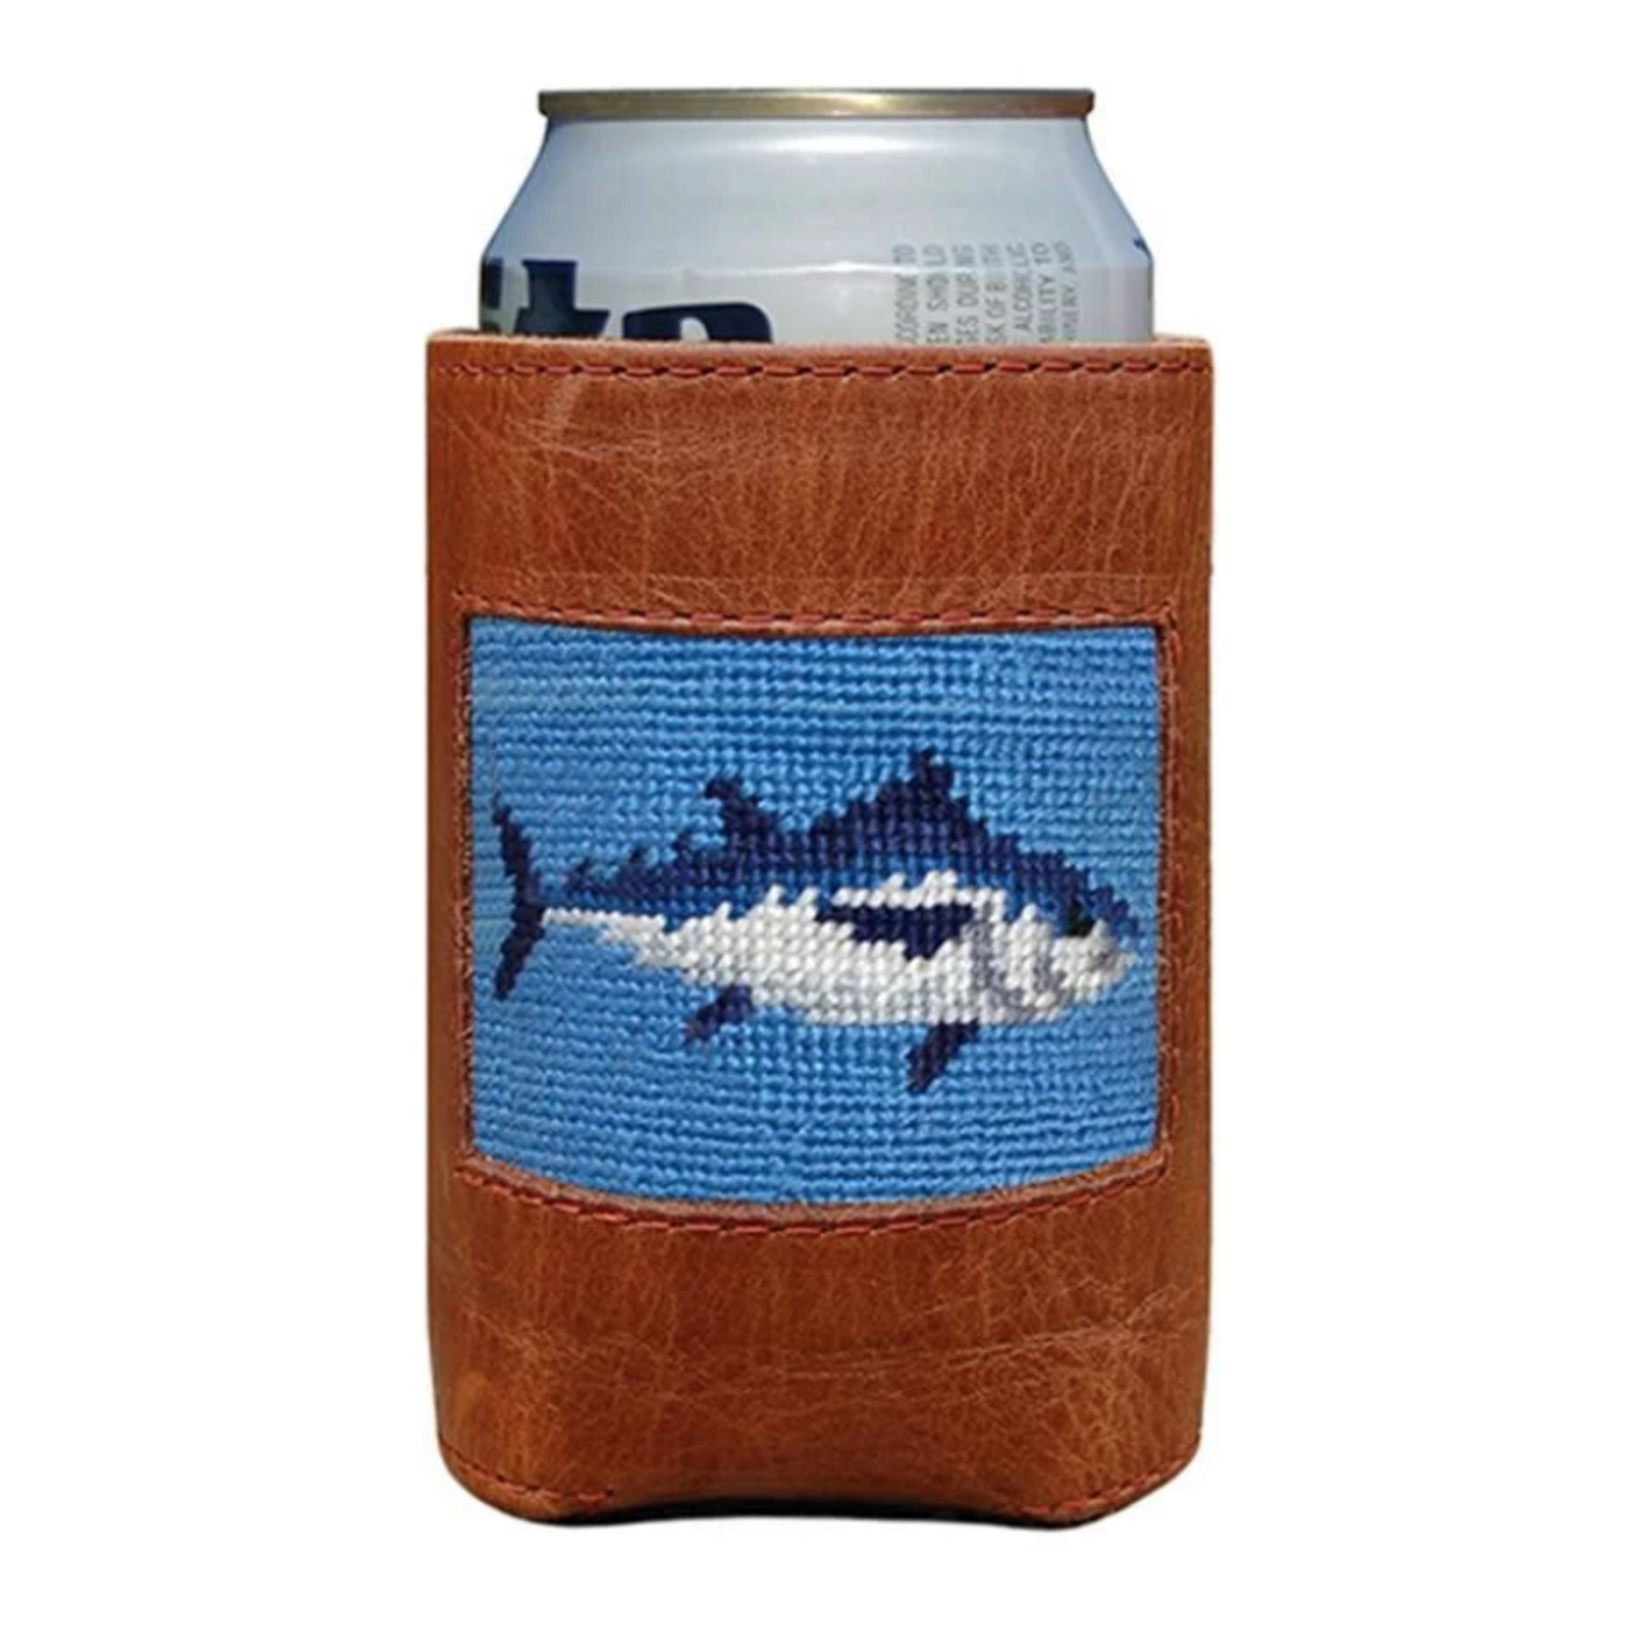 Smathers & Branson Smathers & Branson - Can Cooler Trout